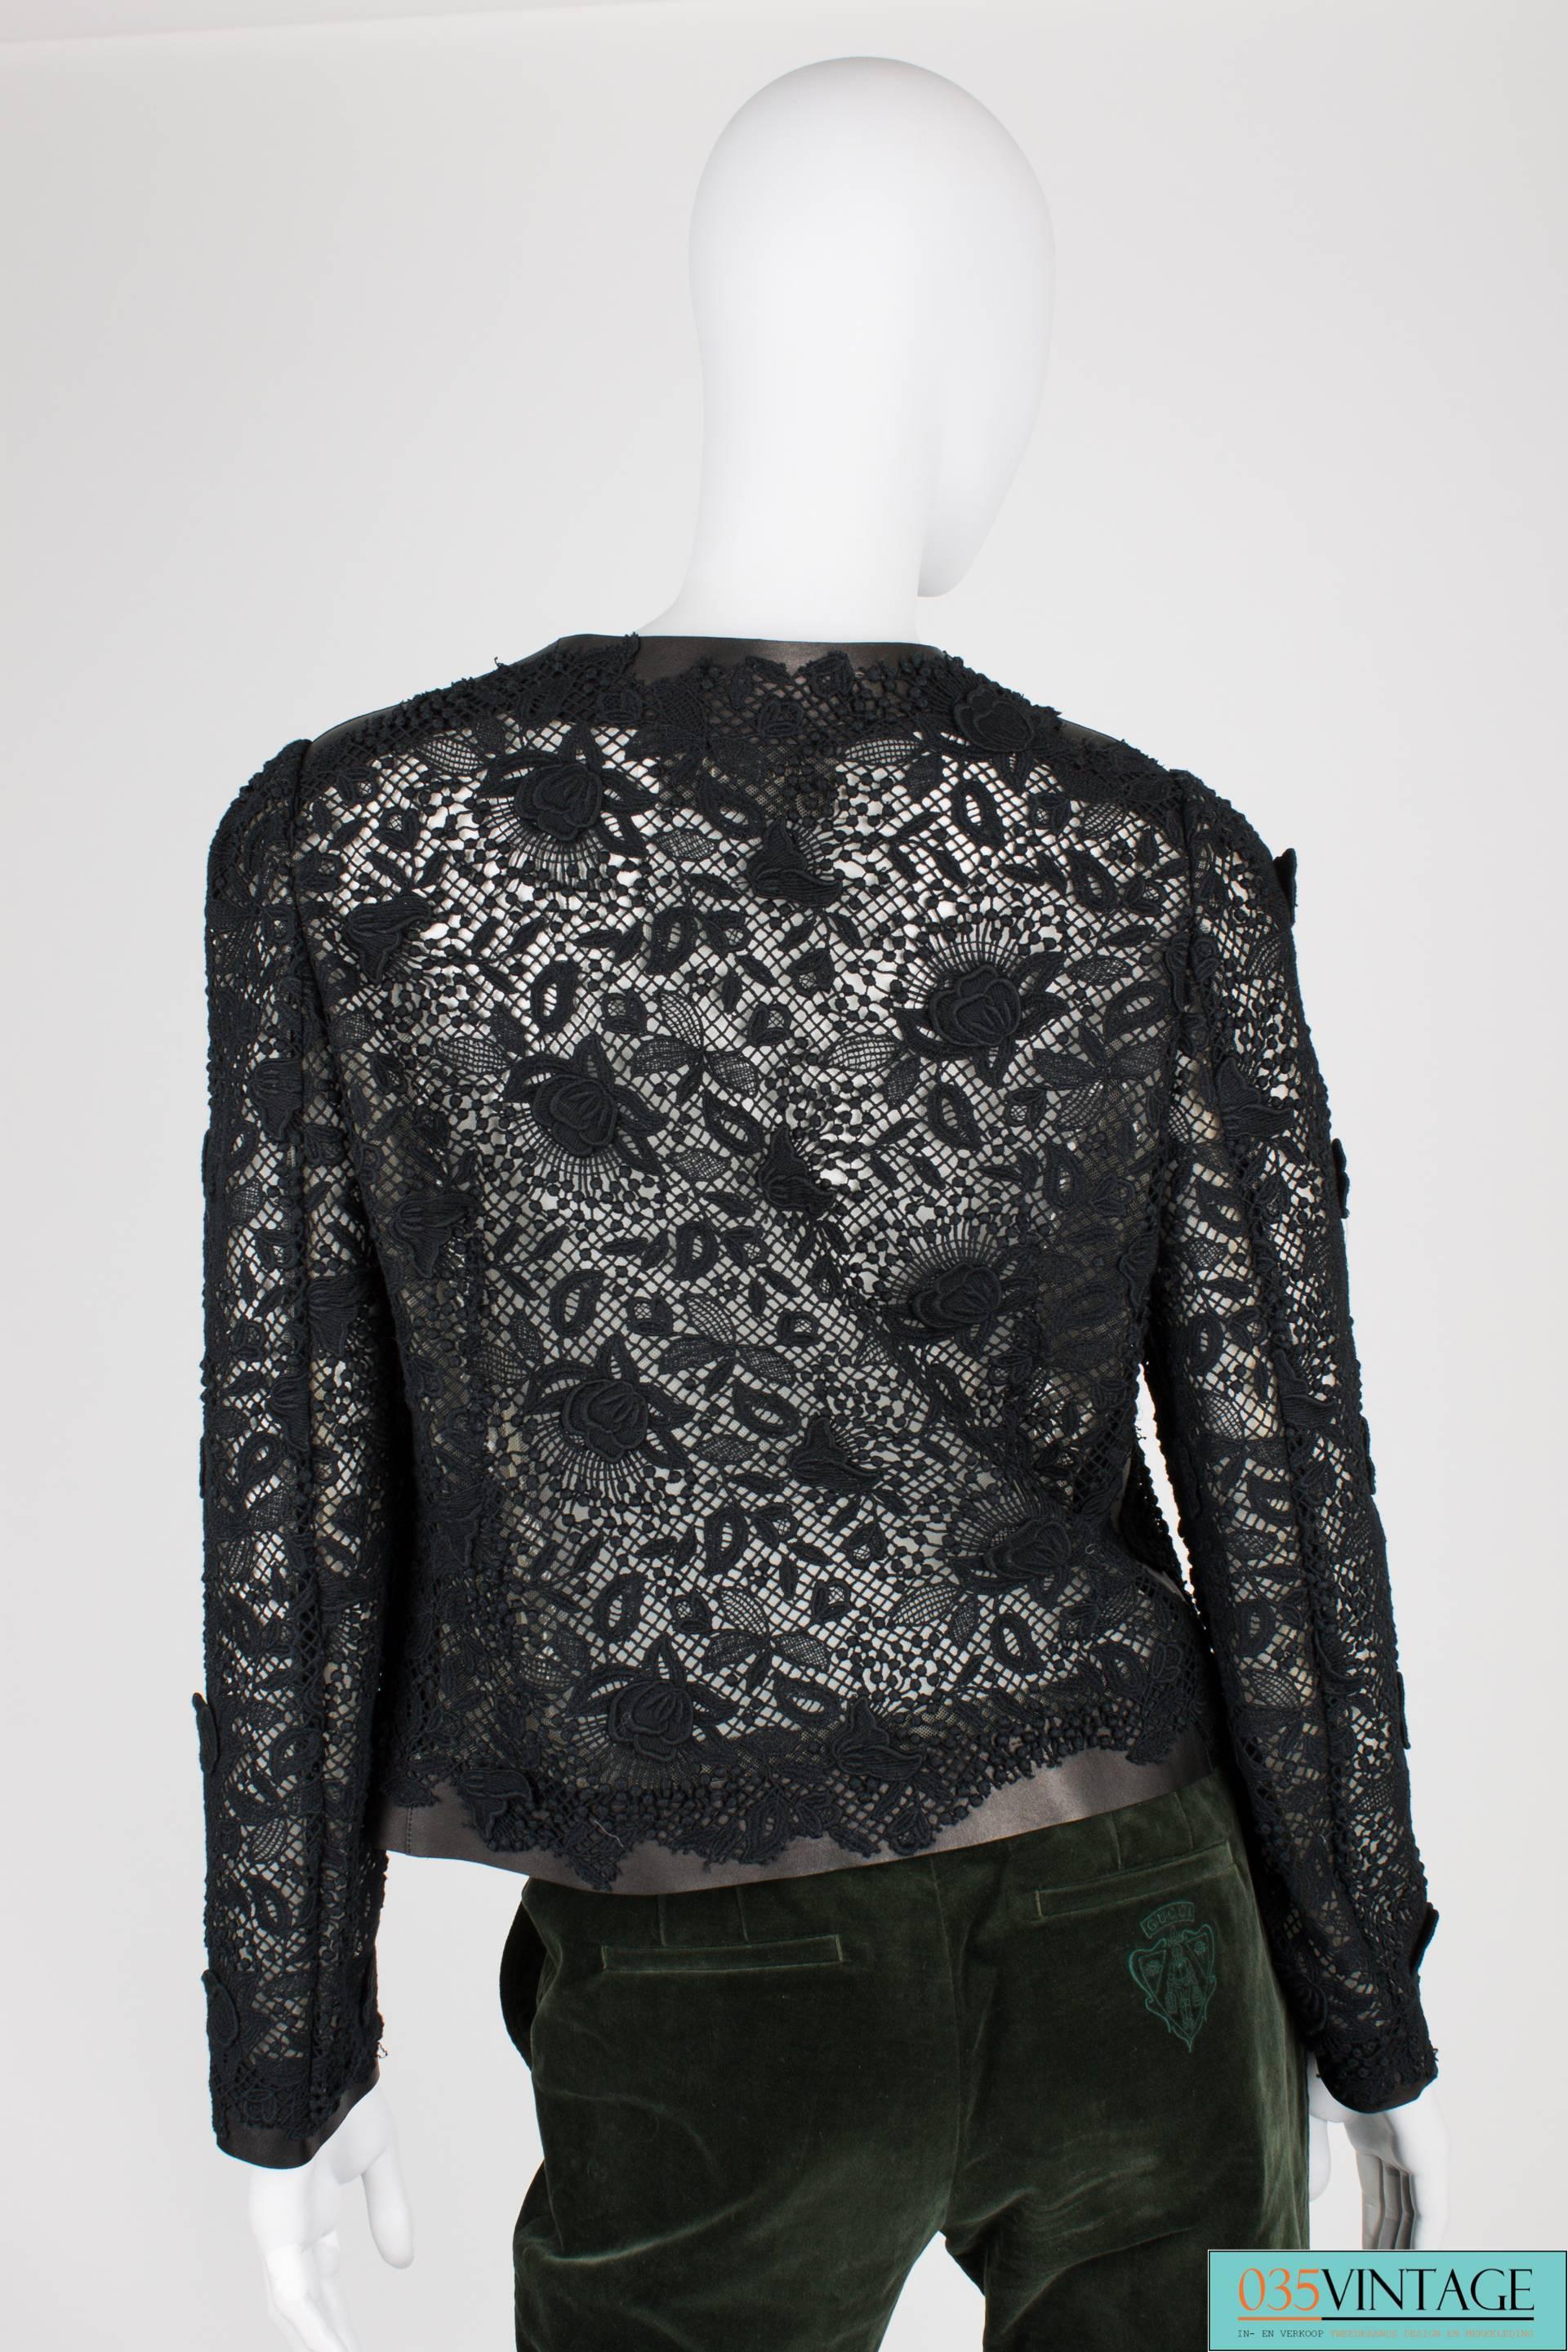 A beautiful black jacket by Valentino made of lace and leather. Very special!

The foundation of this jacket is made of leather, very noticable at the round neckline, shoulders, sleeves and hem. Front closure with three large leather bows and a